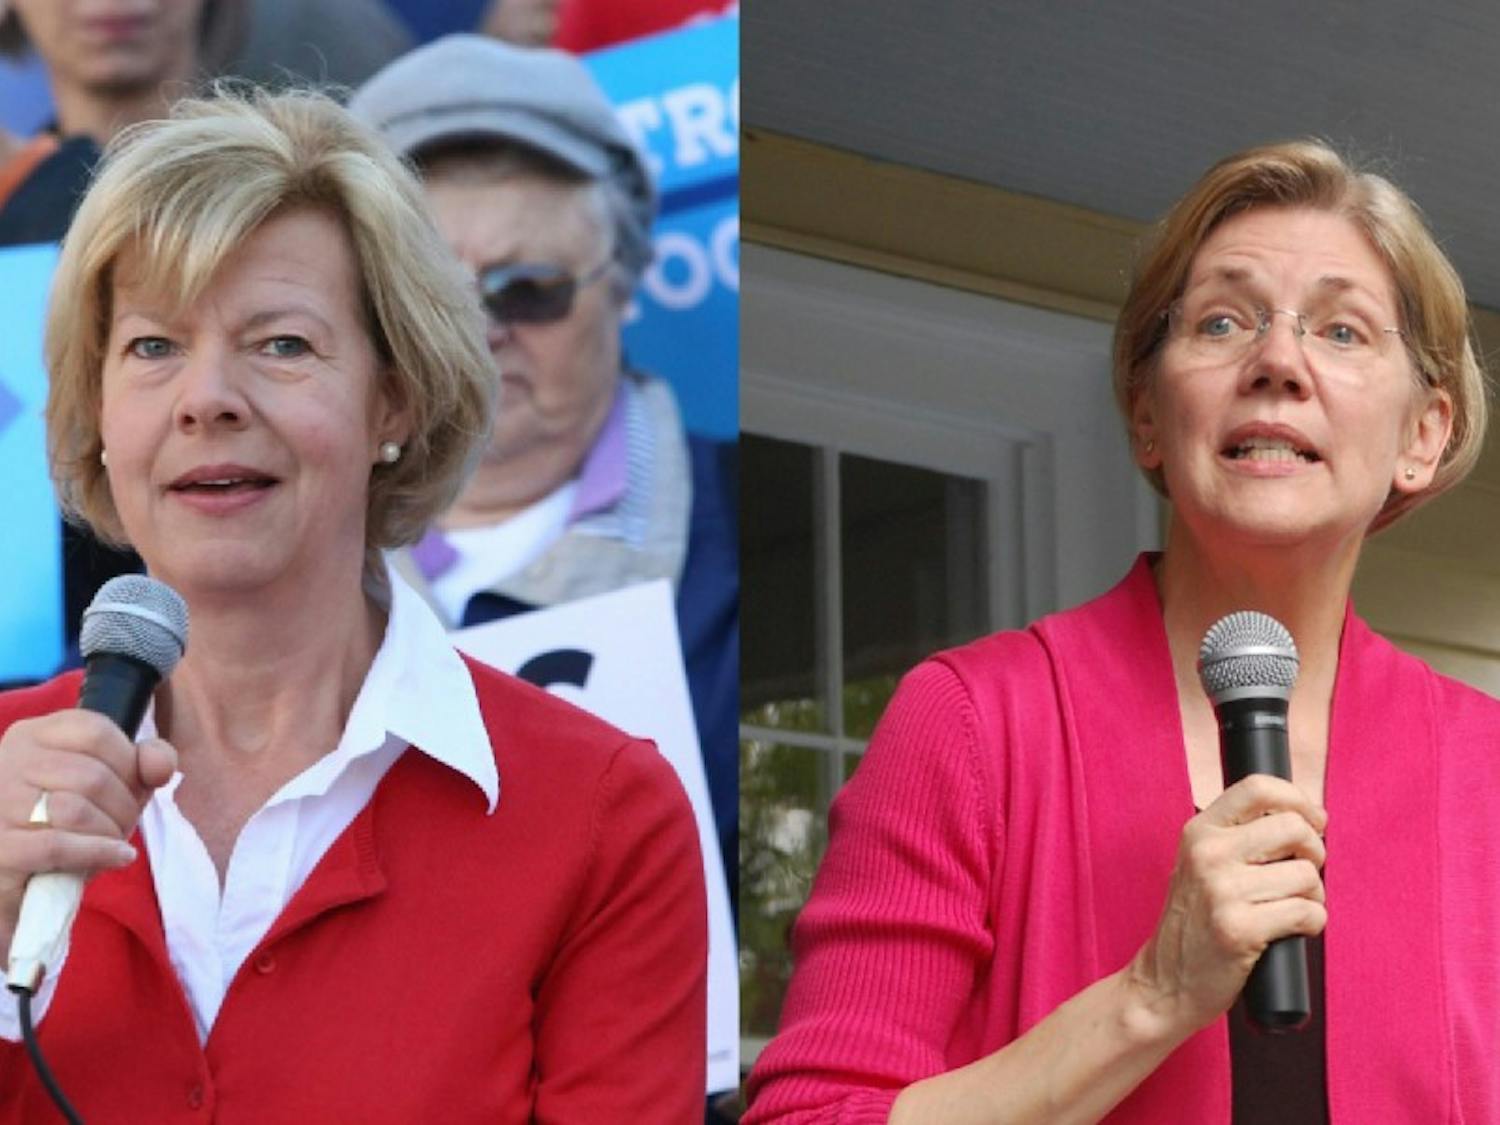 U.S. Sen. Elizabeth Warren rallied for Tammy Baldwin’s reelection campaign in Madison and Milwaukee ahead of Tuesday’s election.